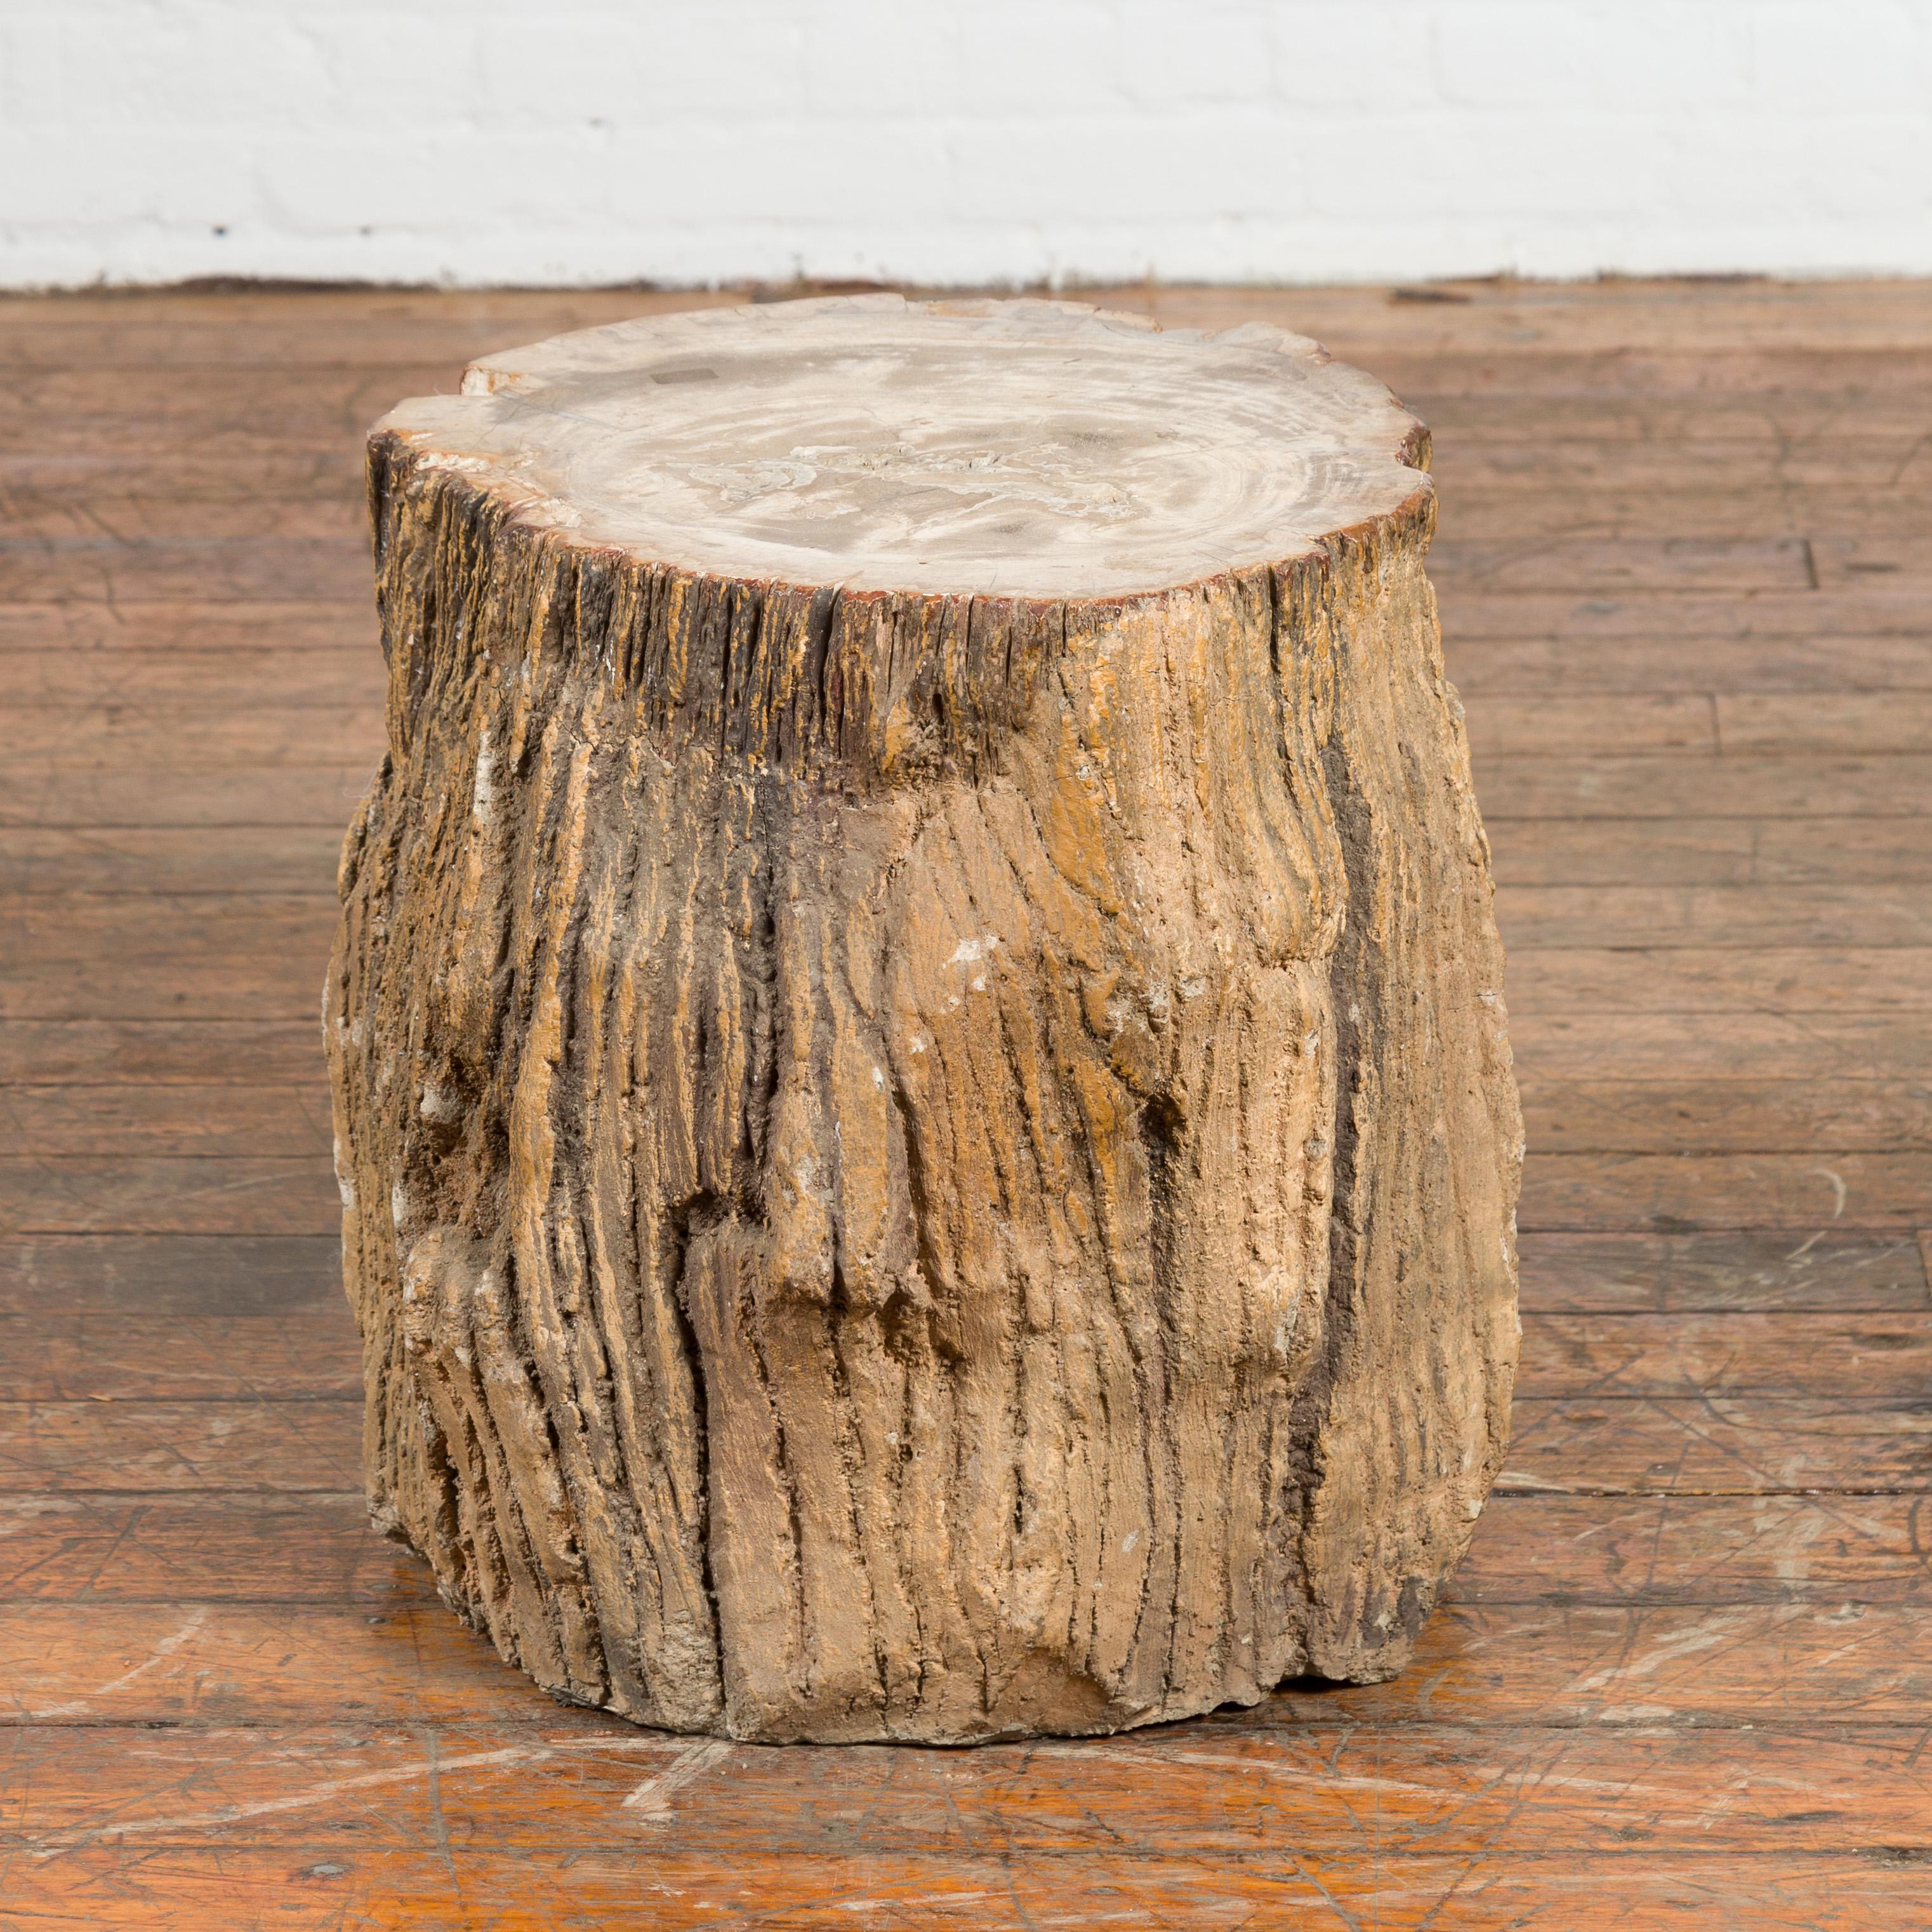 An antique petrified wood tree stump drinks table or stool covered in gesso. Charming us with its grand age and weathered patina, this drinks table will make for a great decorative addition to any home. Petrified wood is the result of a tree having